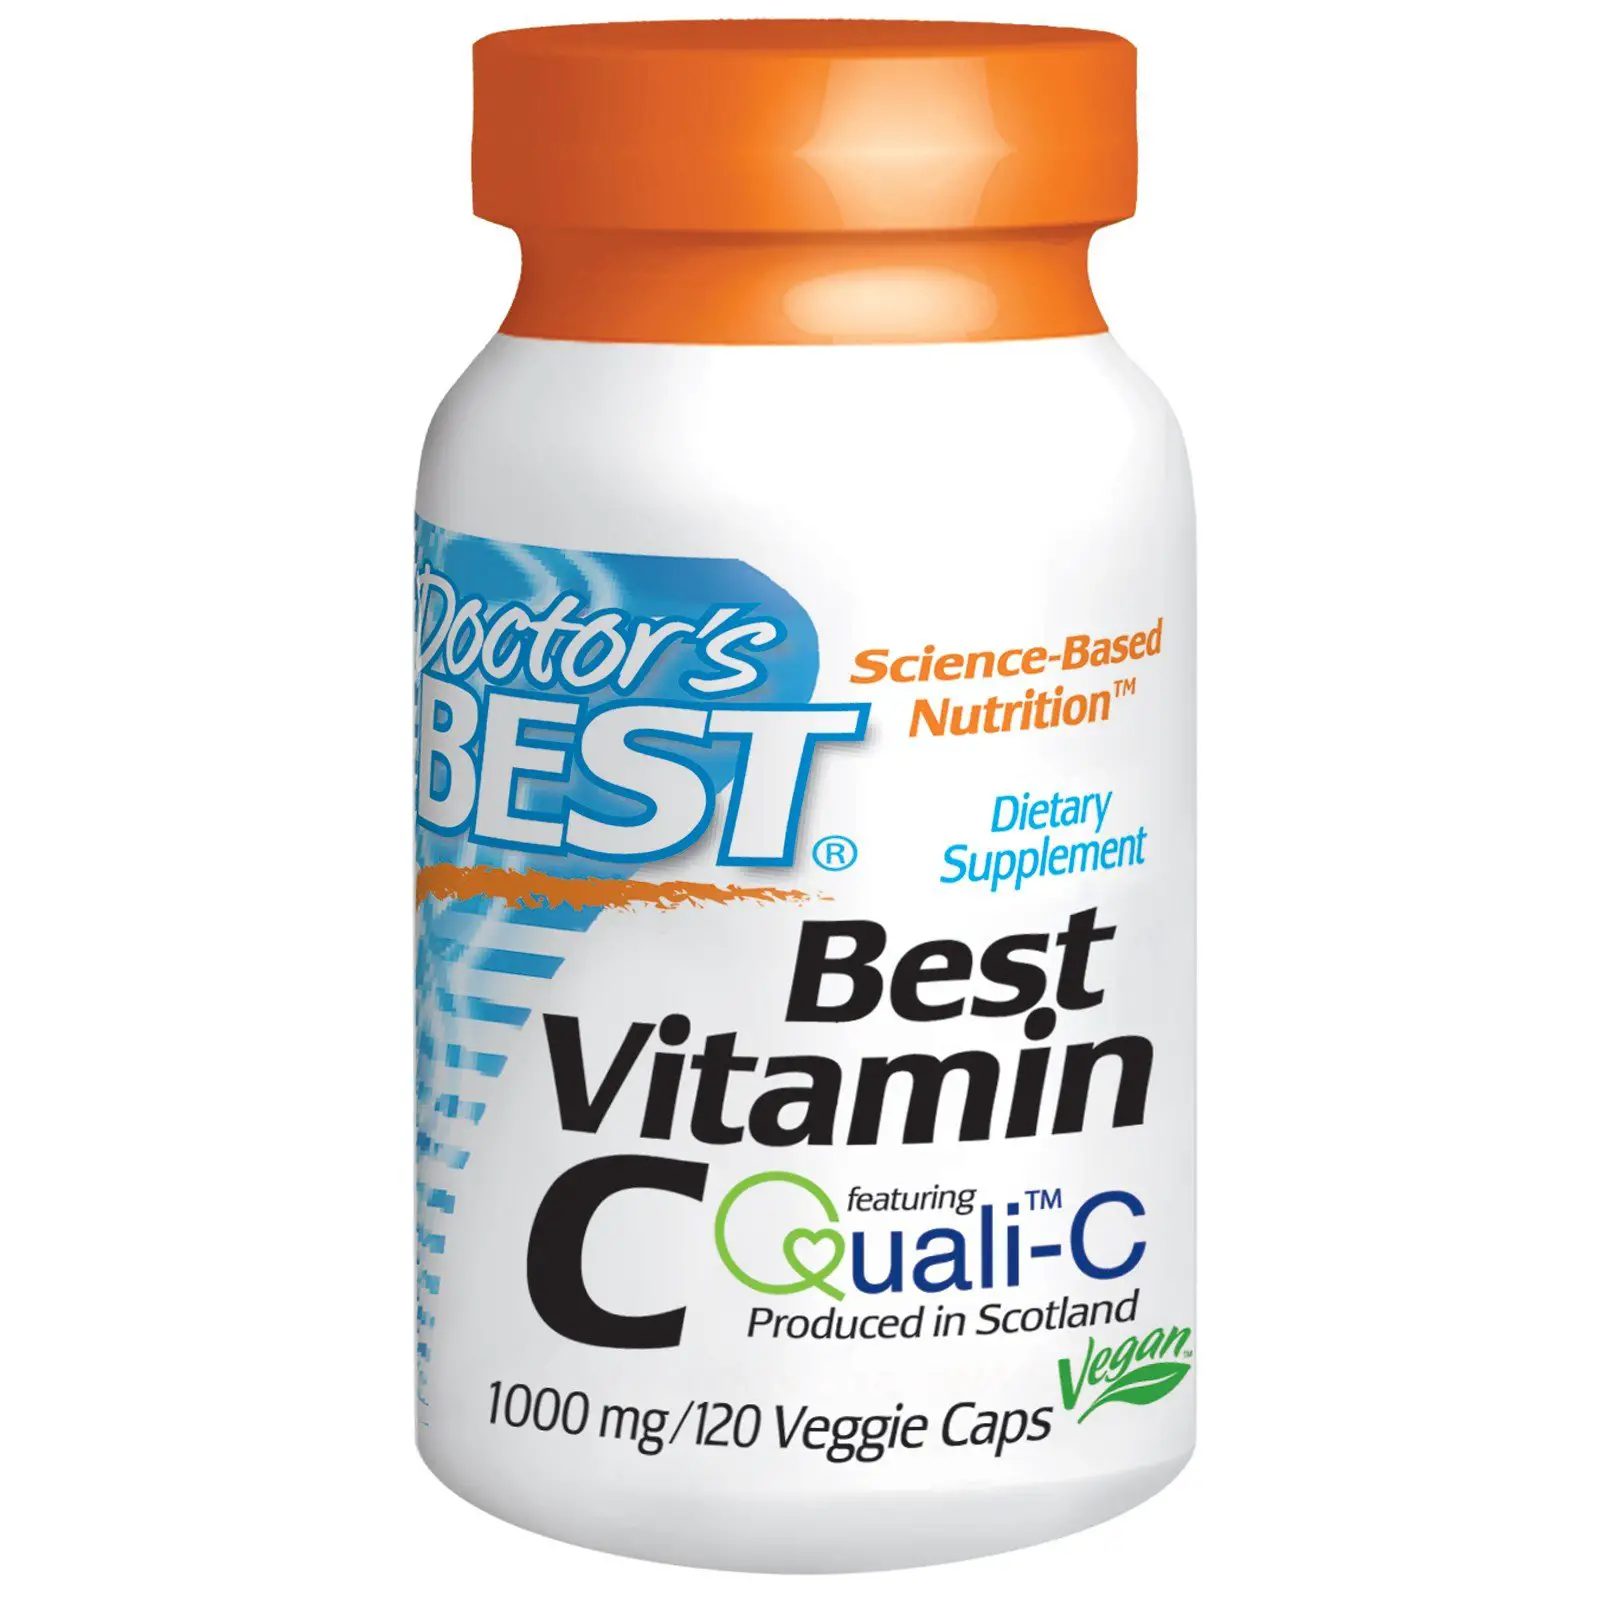 Ranking the best vitamin C supplements of 2021